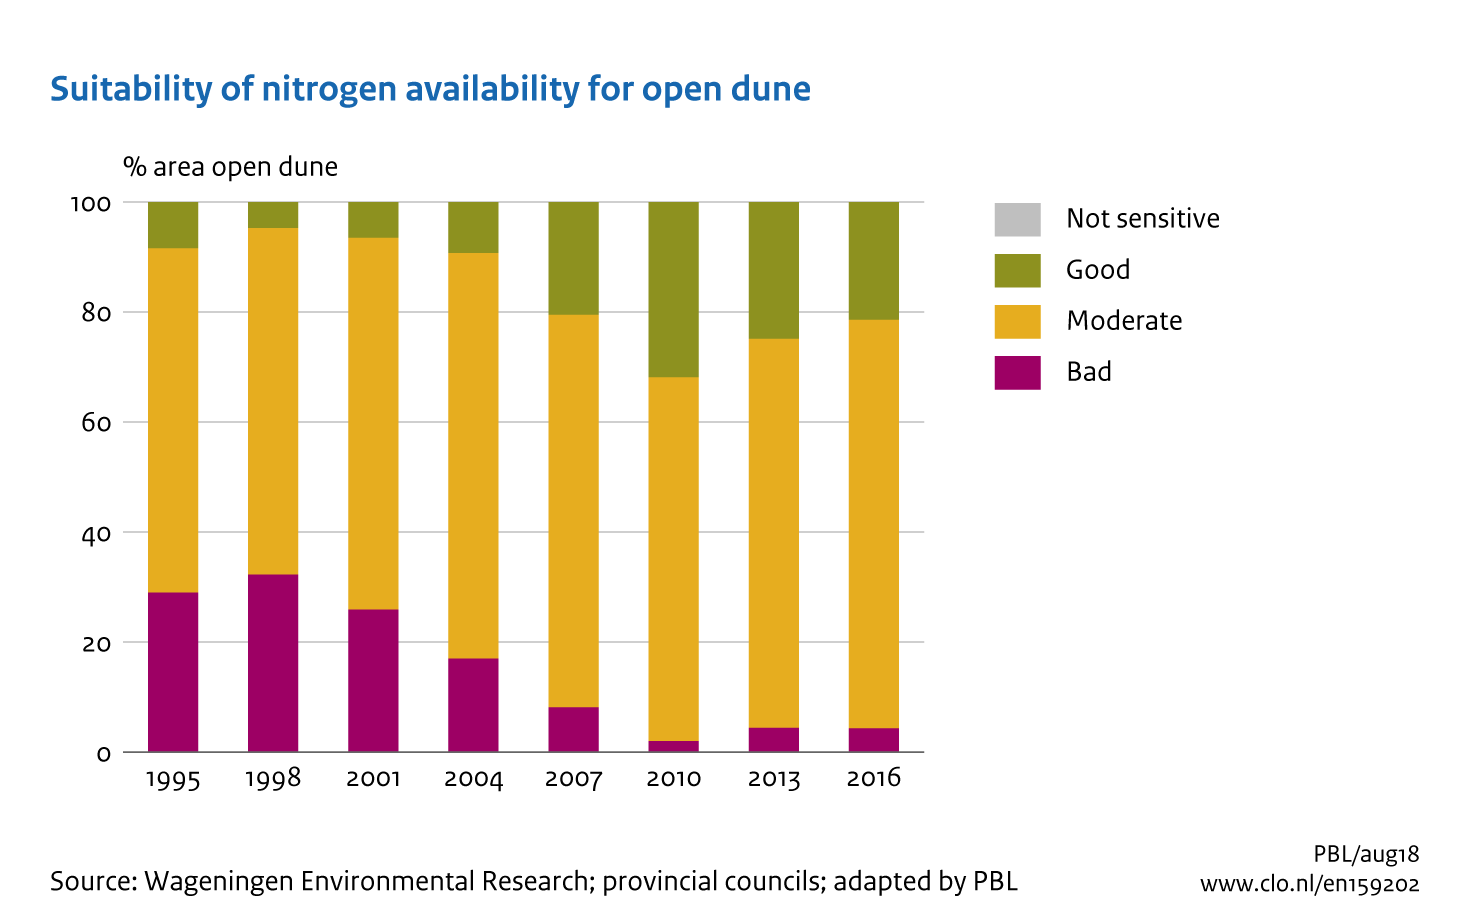 Image  Suitability of nitrogen availability for open dune. The image is further explained in the text.